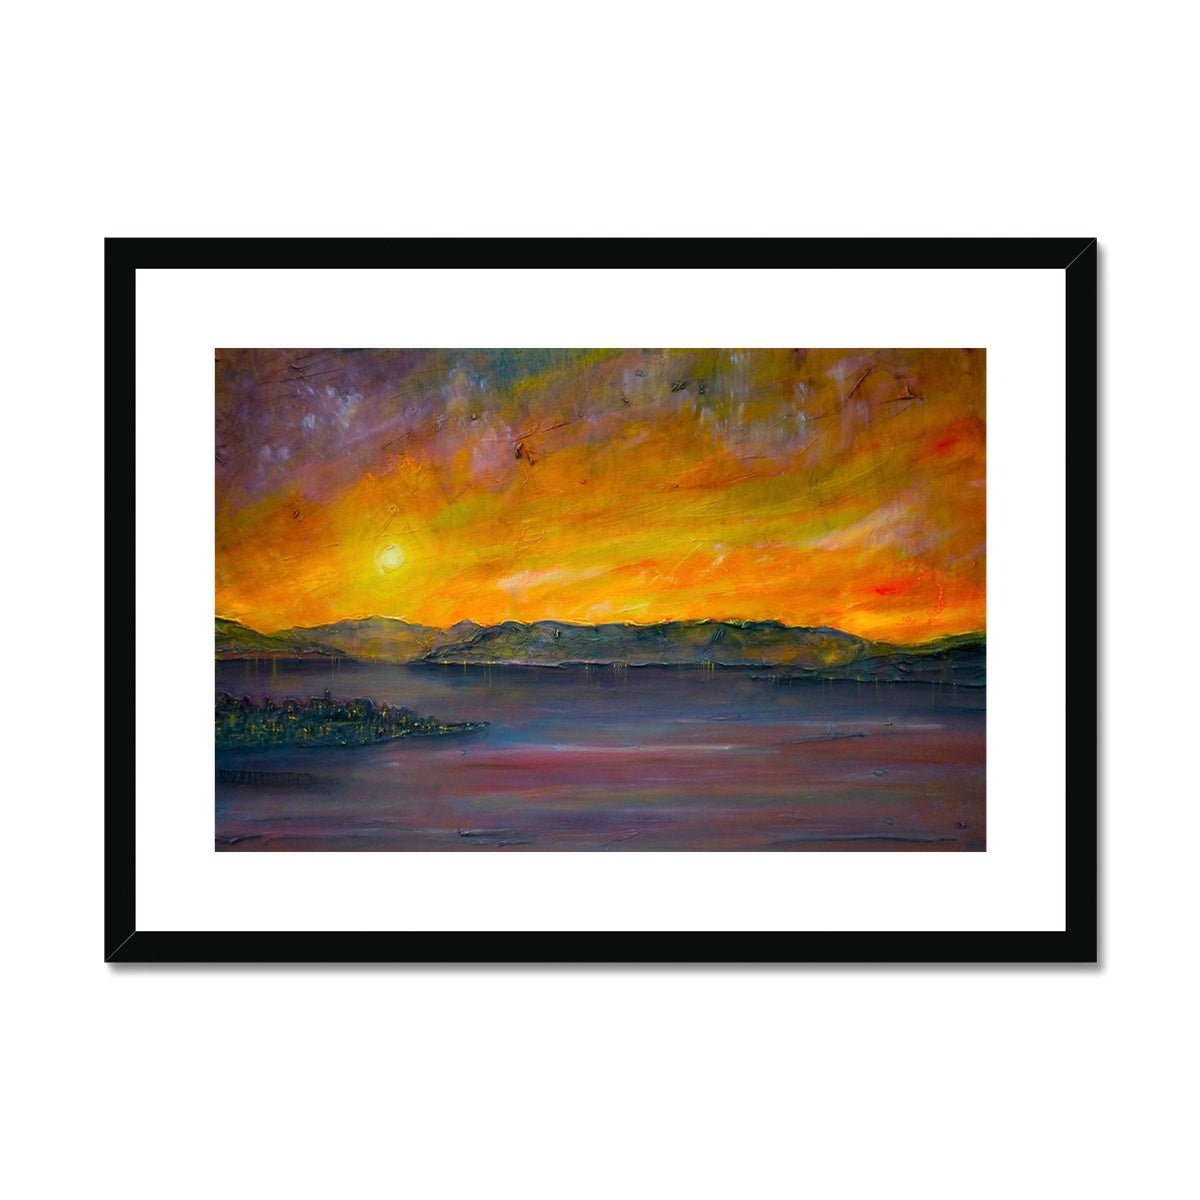 Sunset Over Gourock Painting | Framed & Mounted Prints From Scotland-Framed & Mounted Prints-River Clyde Art Gallery-A2 Landscape-Black Frame-Paintings, Prints, Homeware, Art Gifts From Scotland By Scottish Artist Kevin Hunter